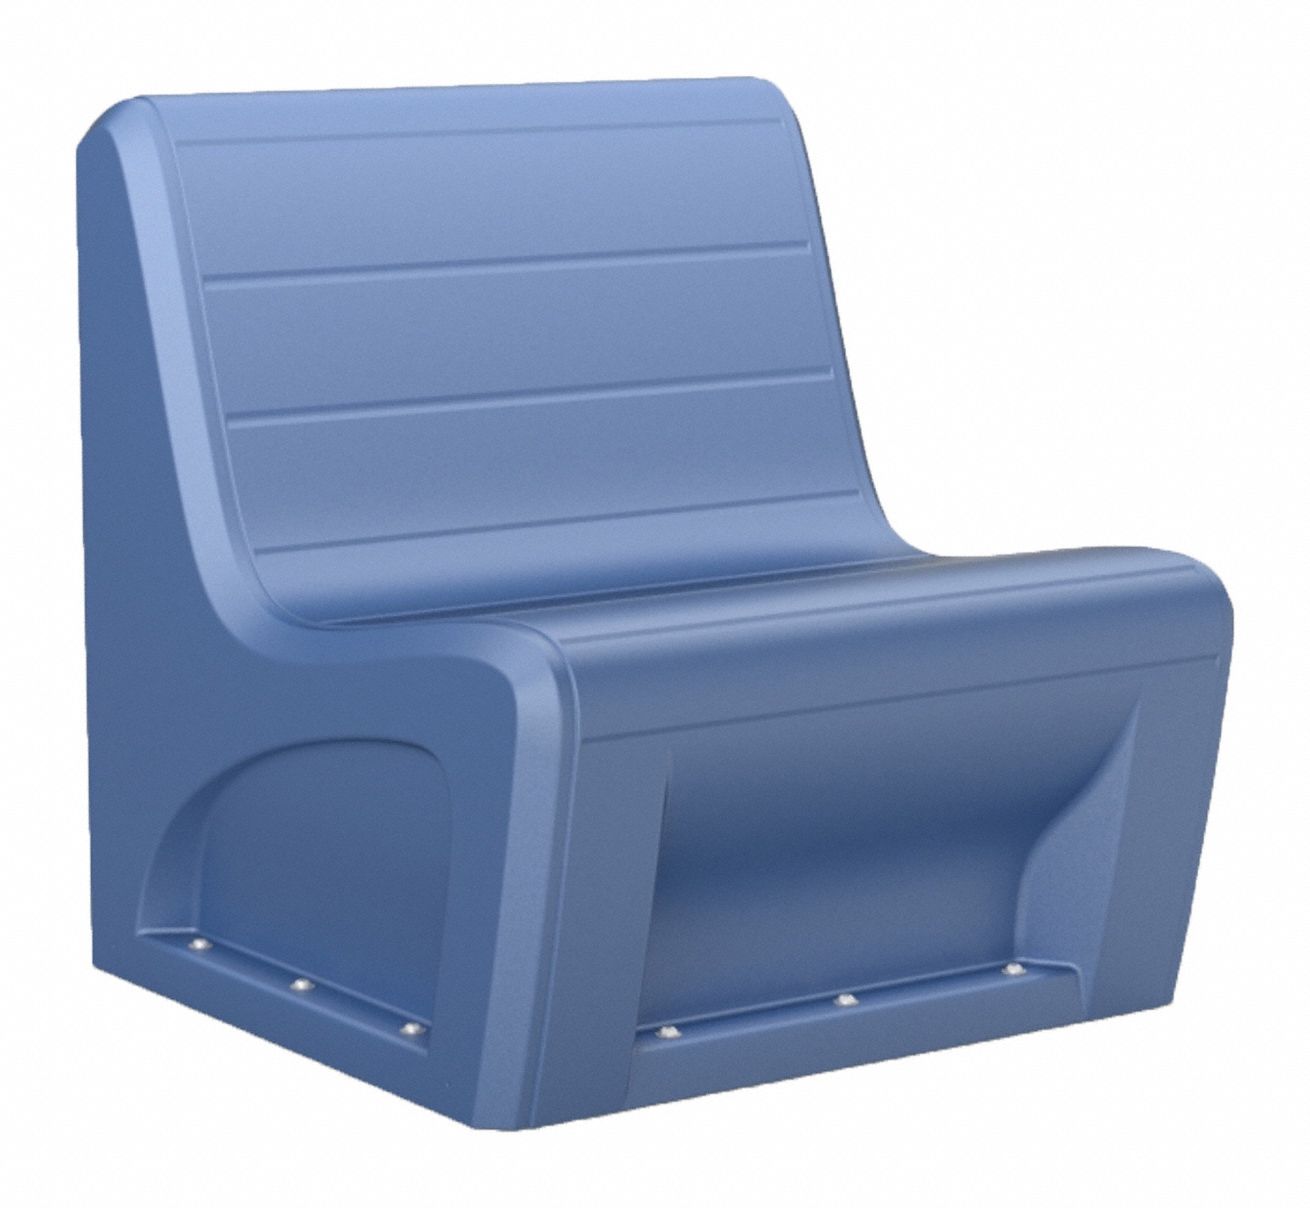 Sabre Sectional Chair Midnight Blue: 30 1/2 in Wd, 32 in Lg, 33 in Ht, 500 lb Wt Capacity